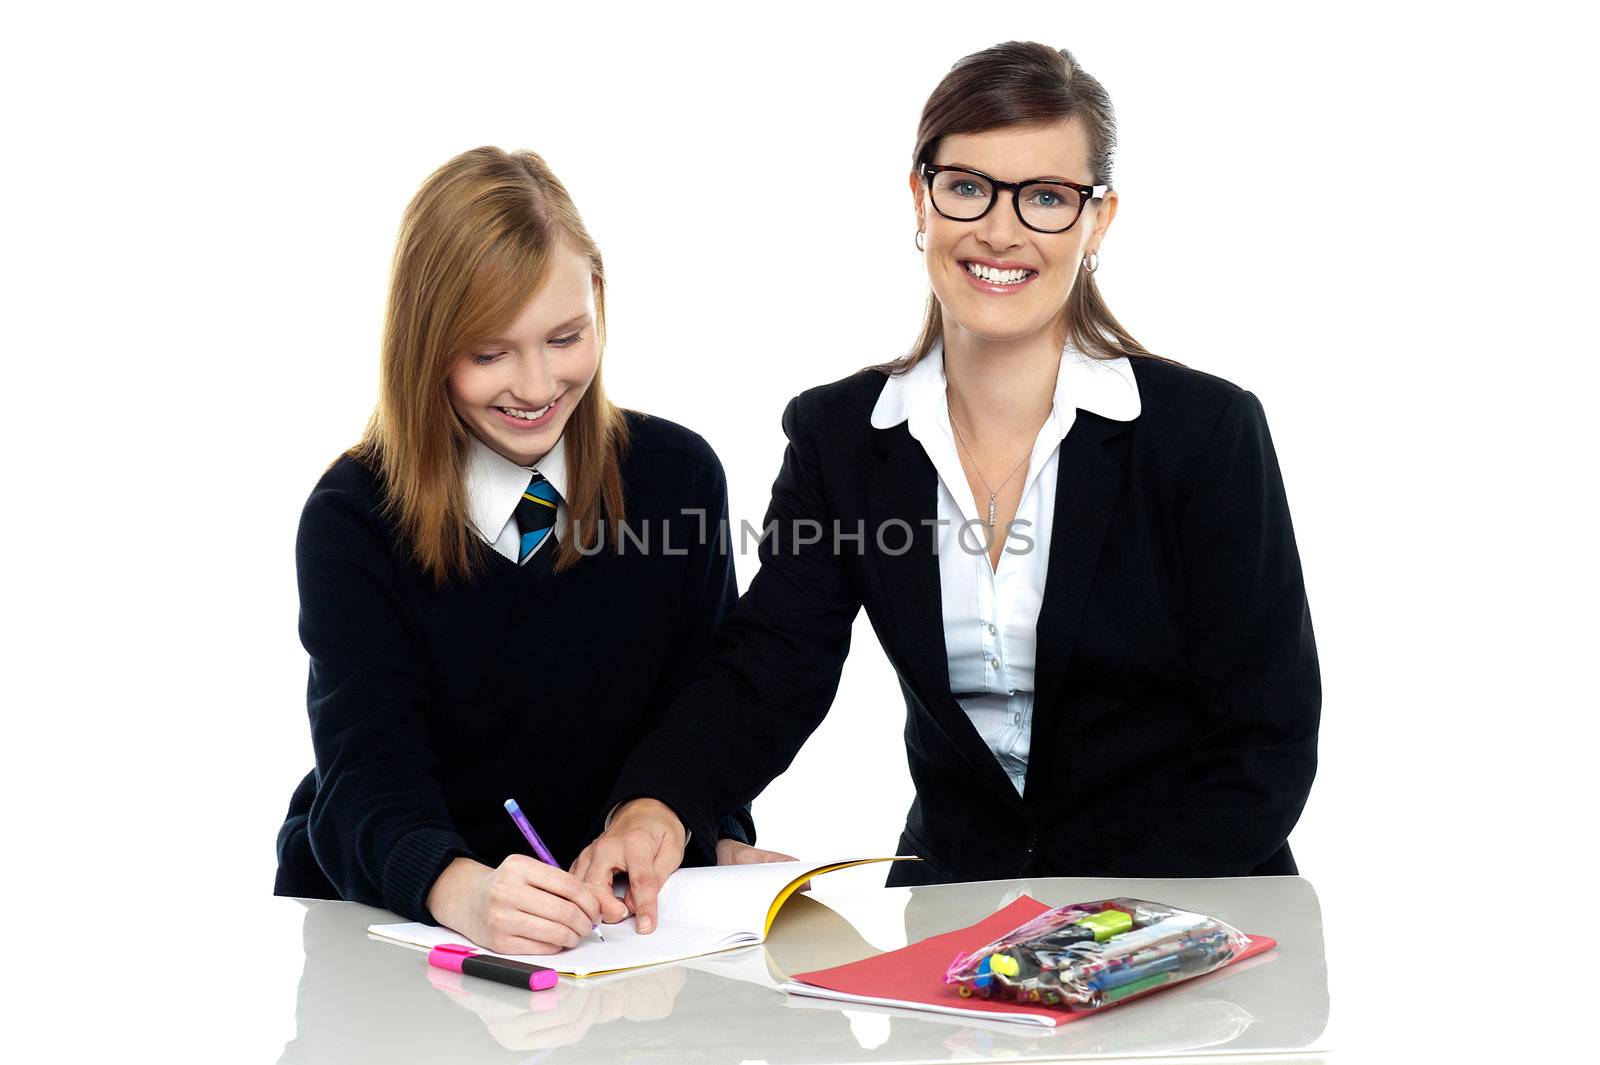 Bespectacled teacher pointing out the mistakes in her students notebook and facing the camera.